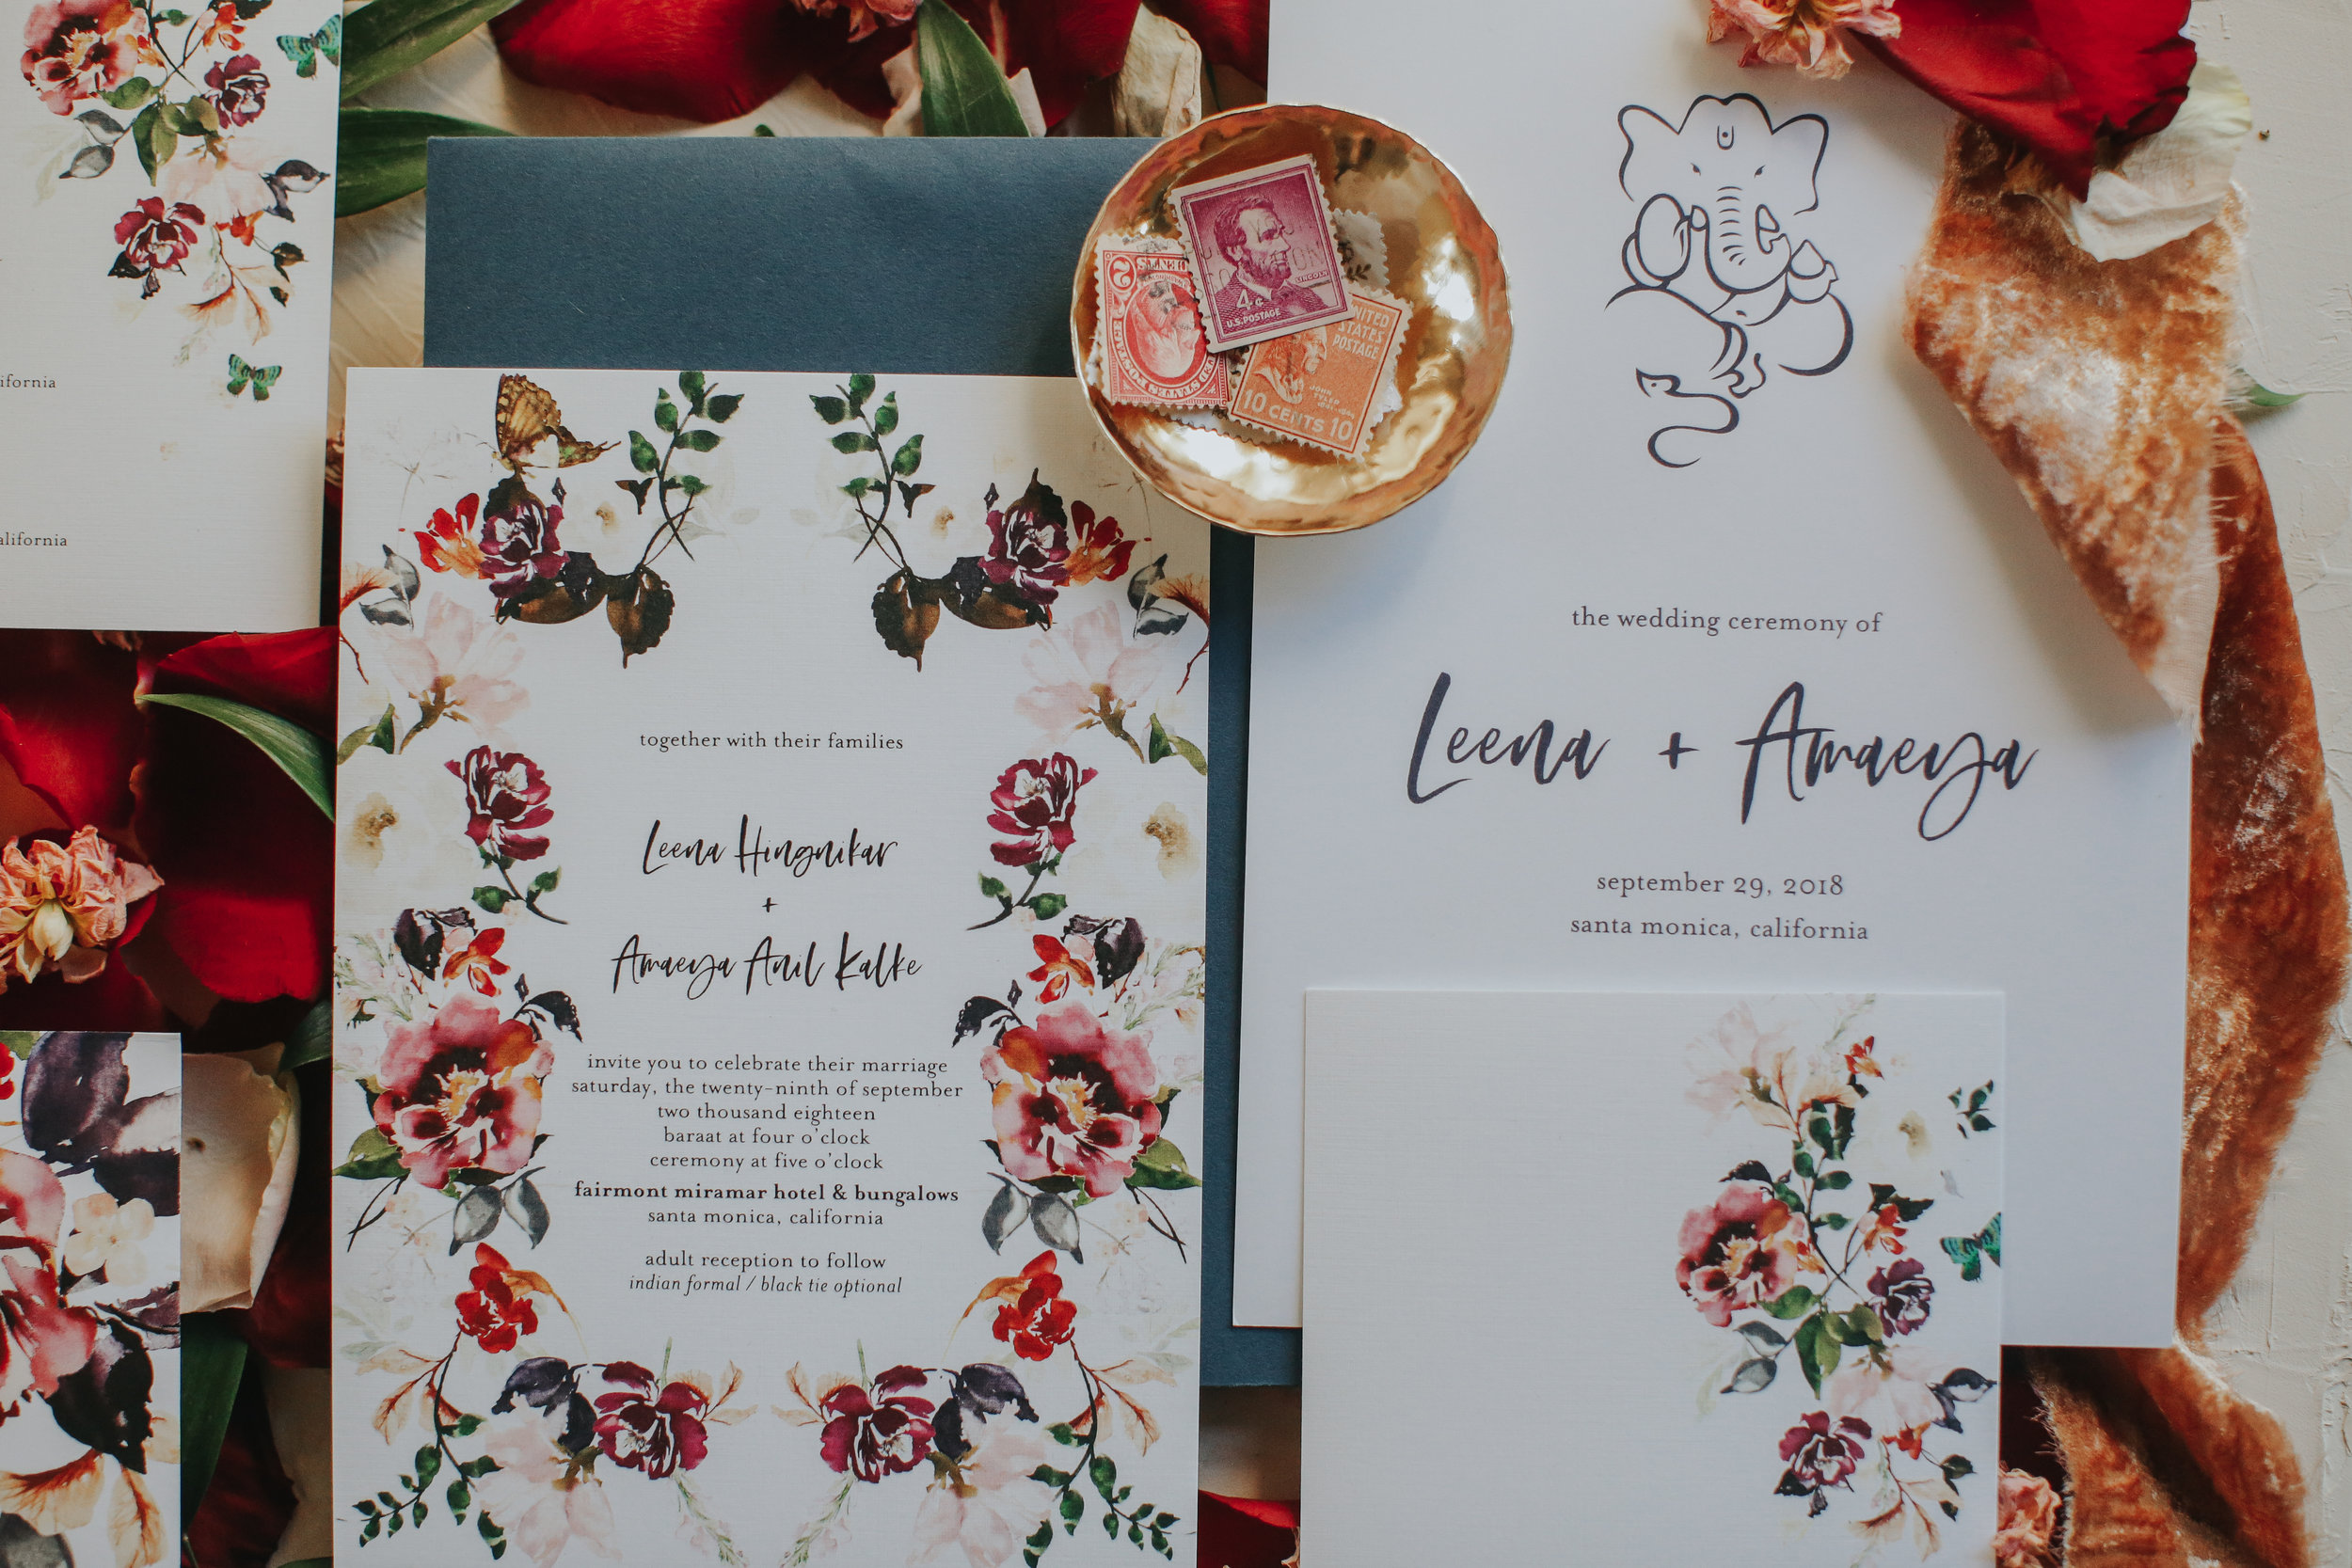 Custom floral wedding invitations, shabby chic wedding invitations, Los Angeles wedding  || Orange Blossom Special Events